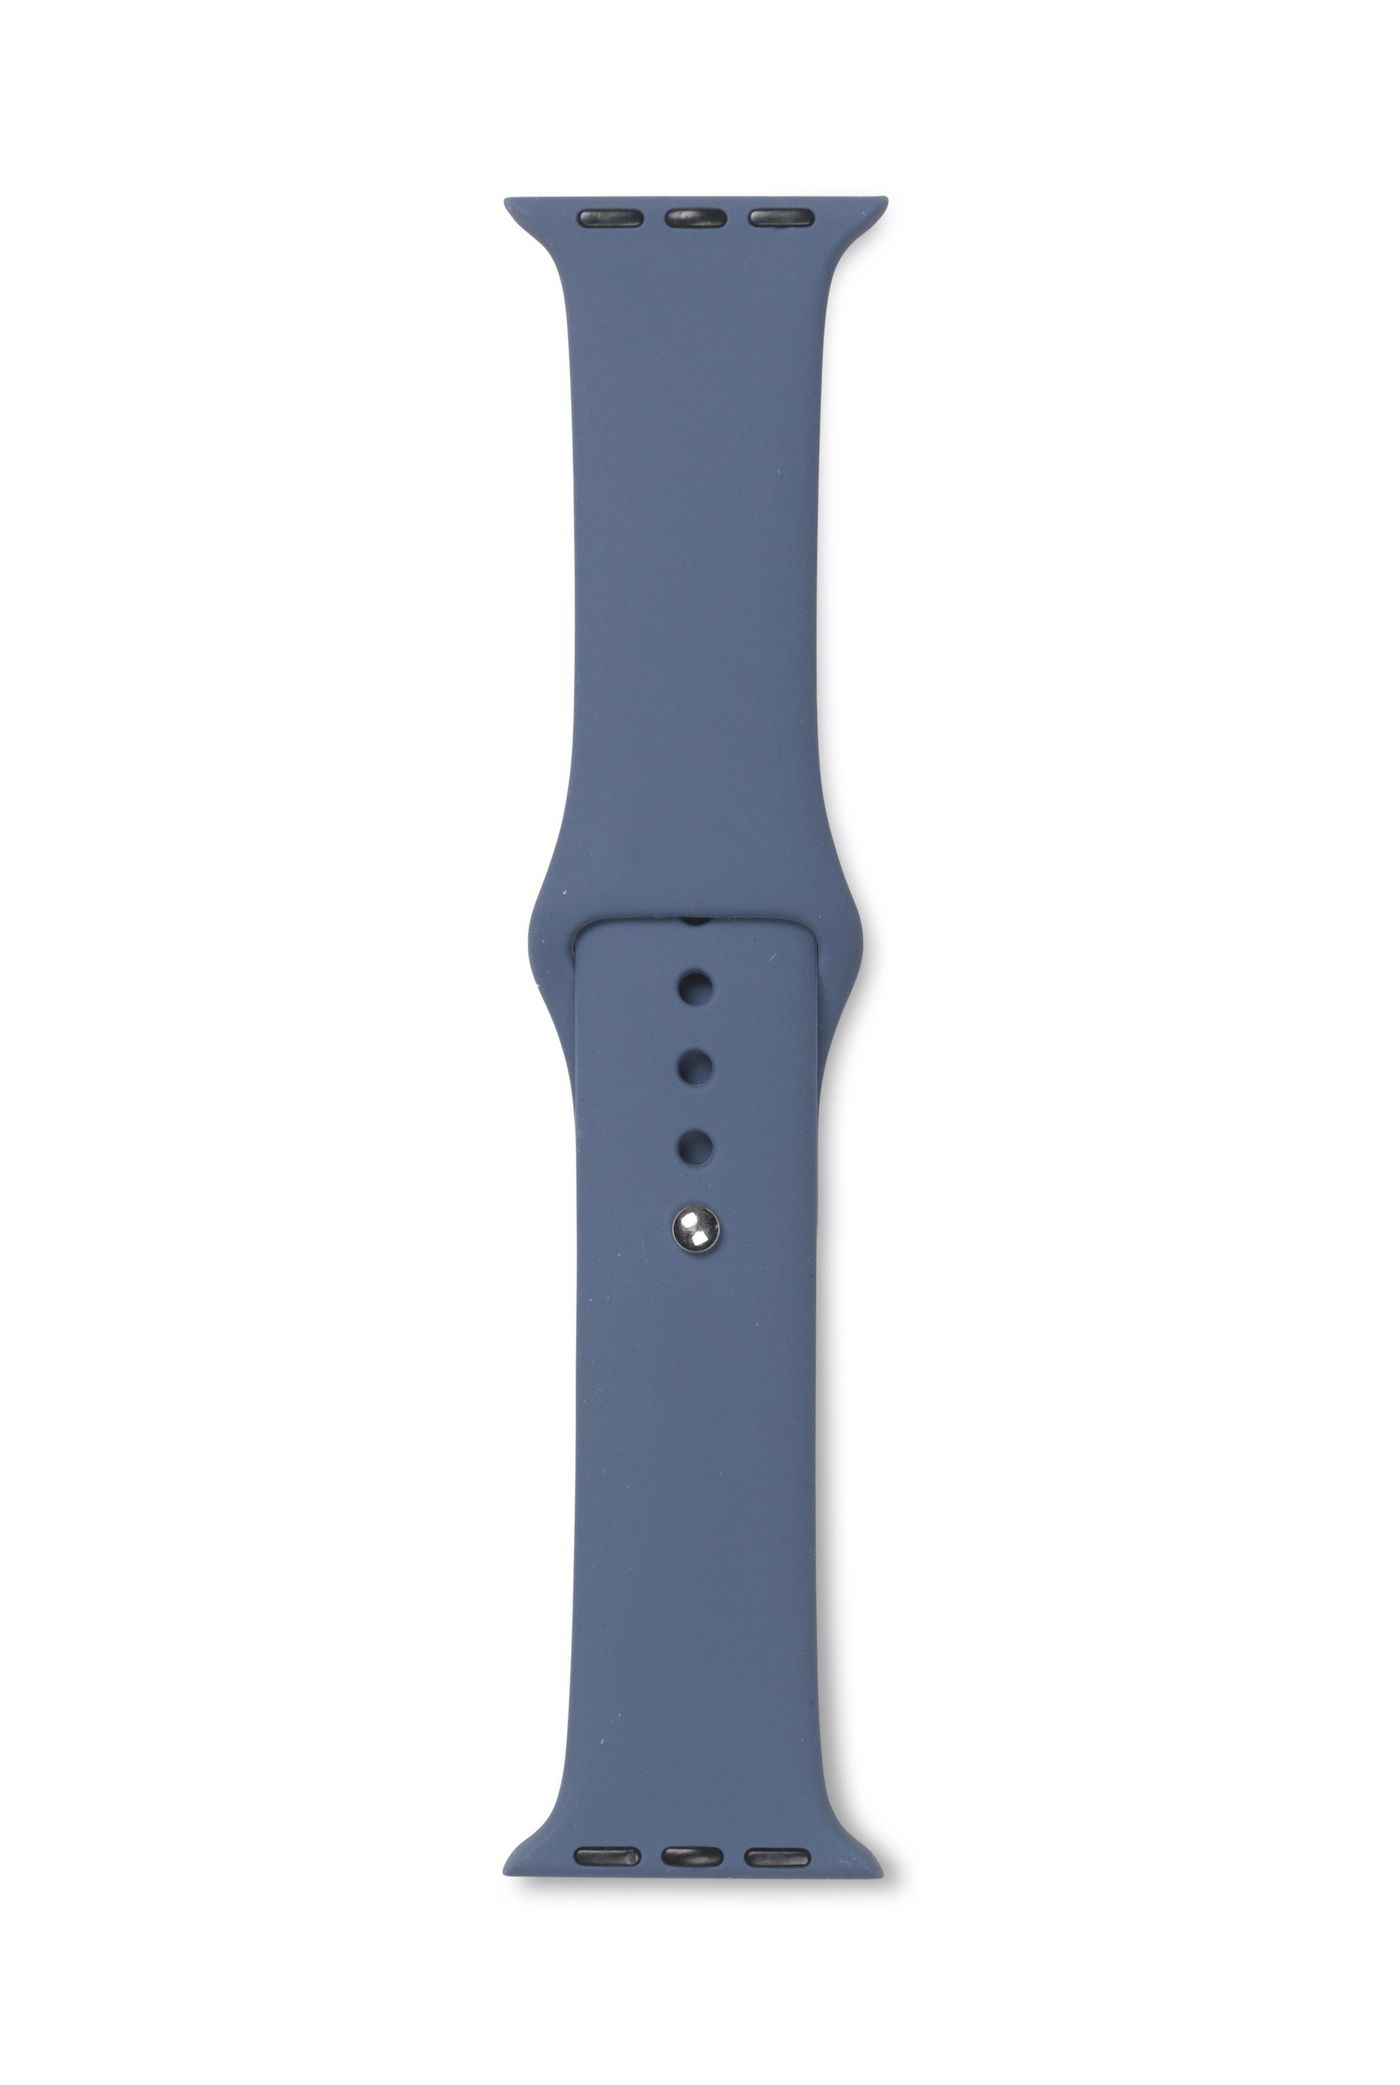 Apple Watch Silicone Strap Color Midnight Blue Width